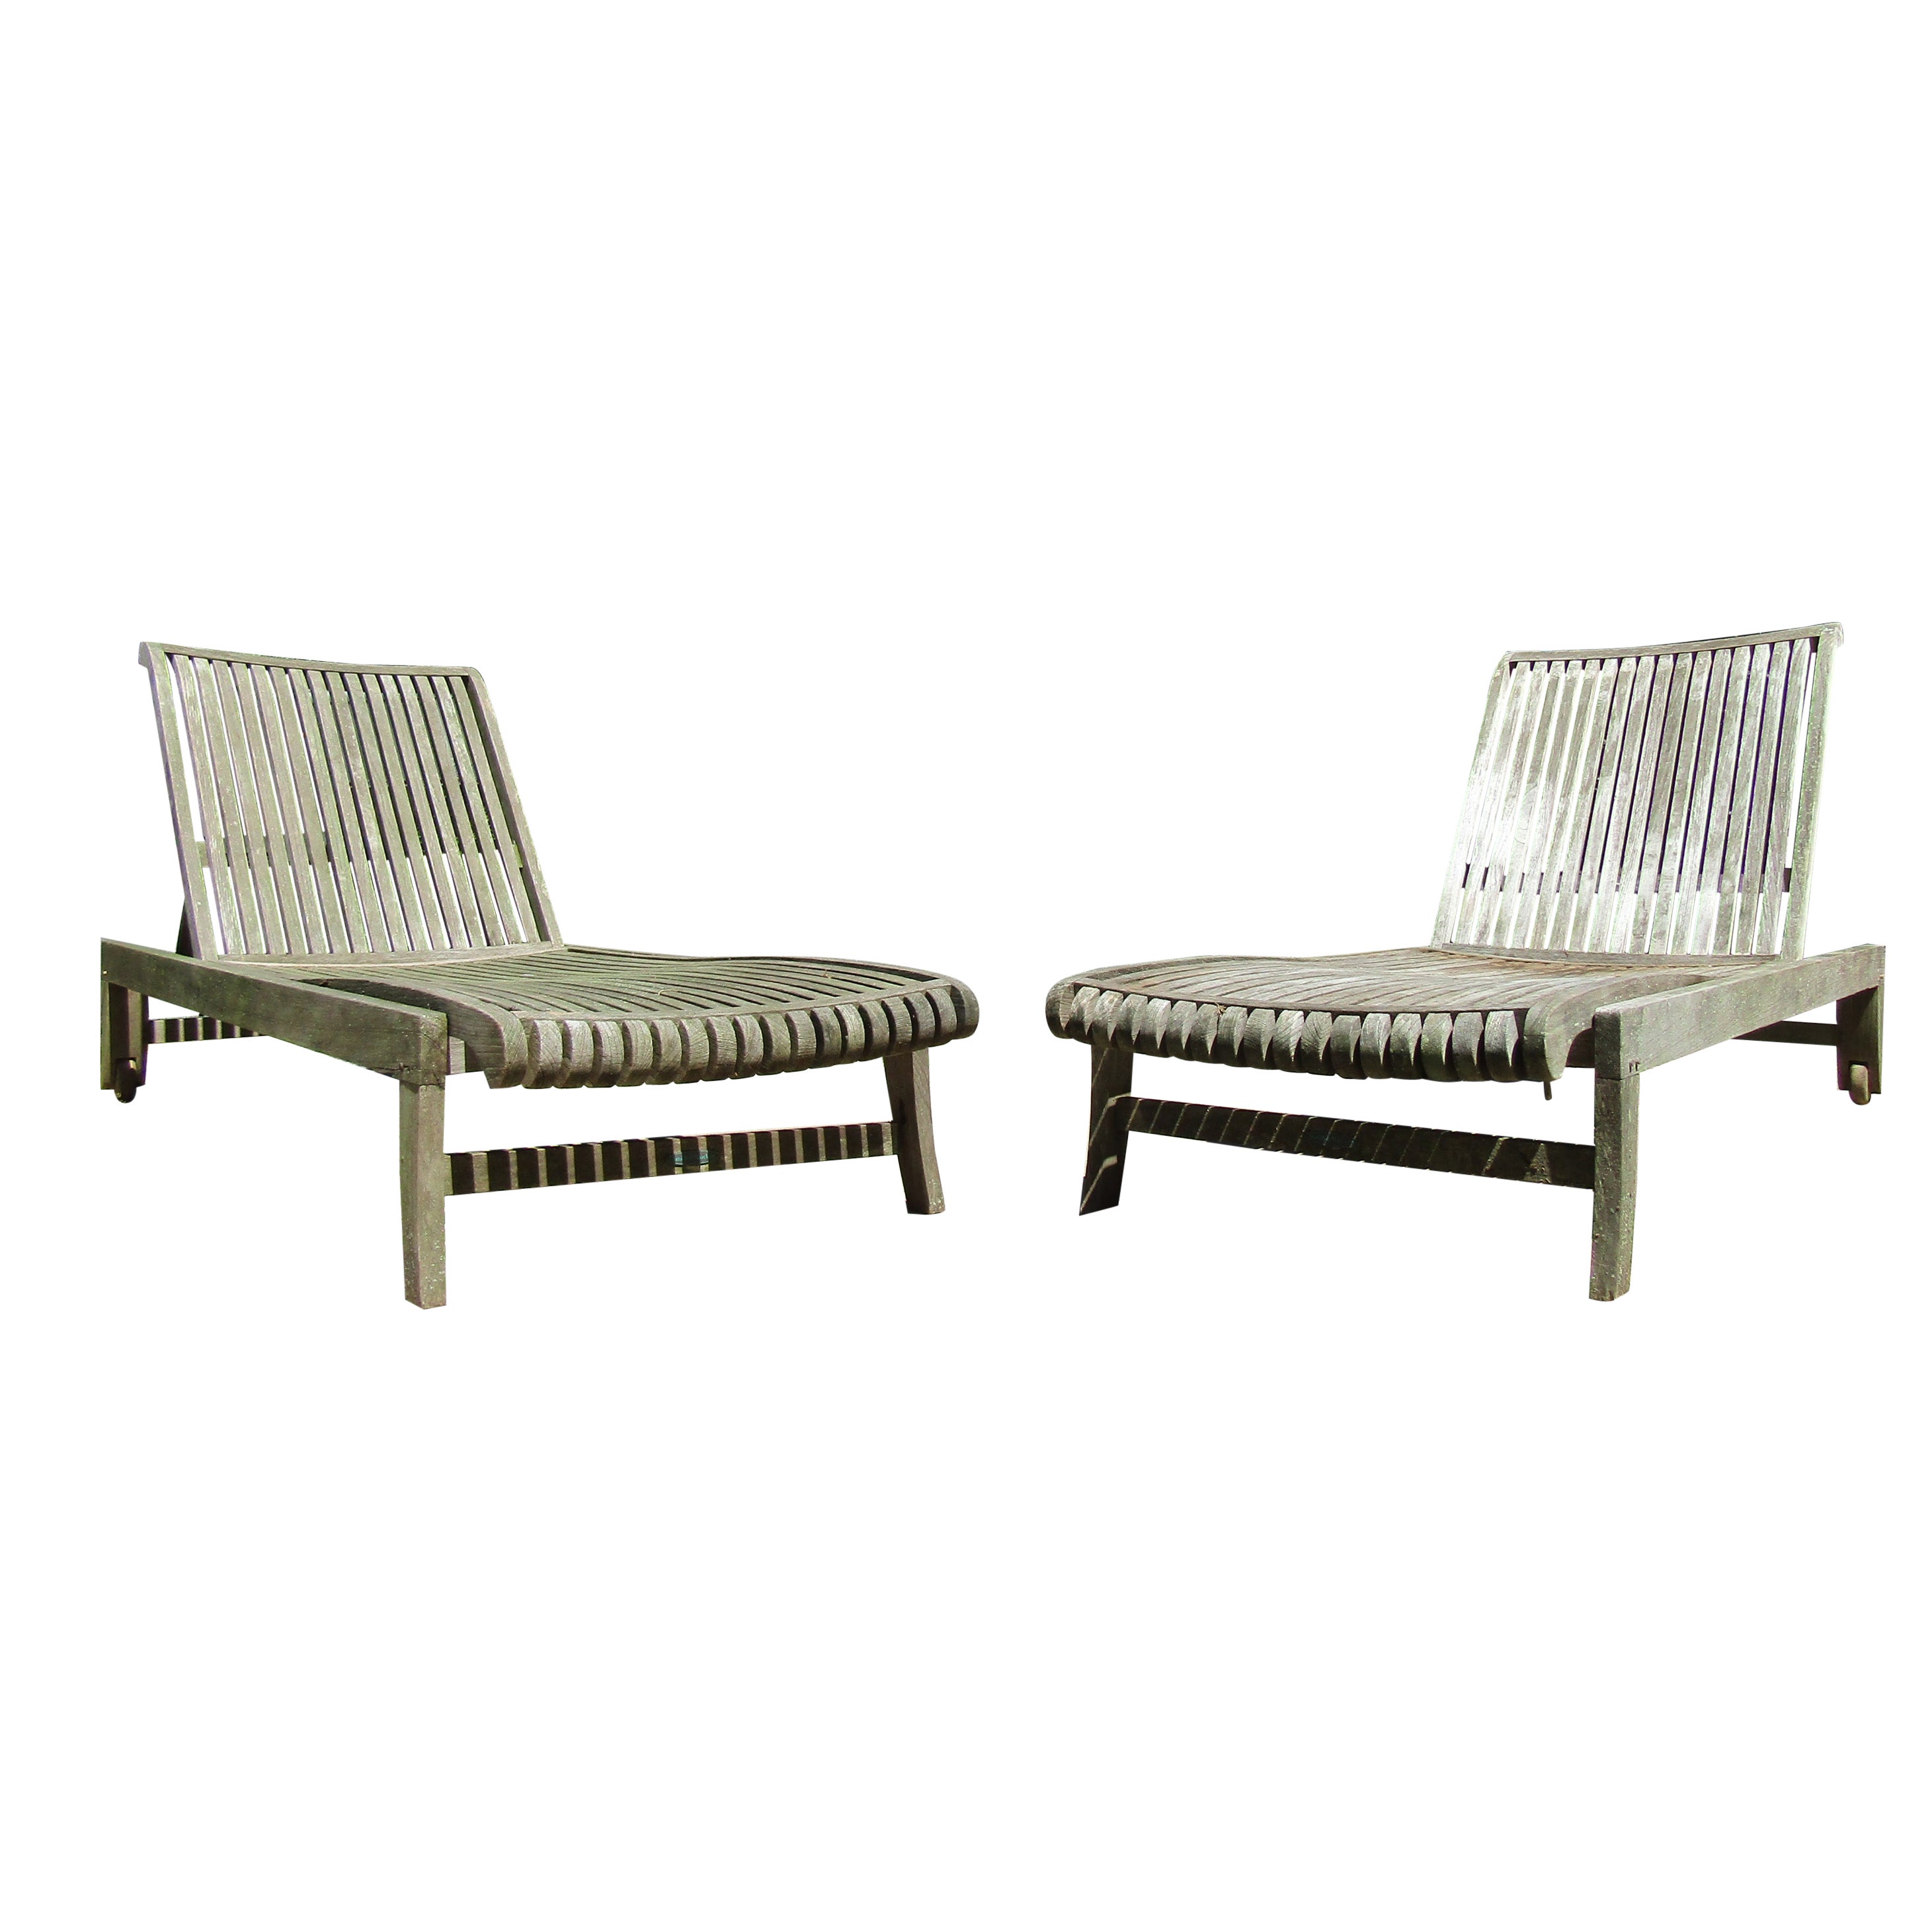 Pair of Smith & Hawken Patio Chairs